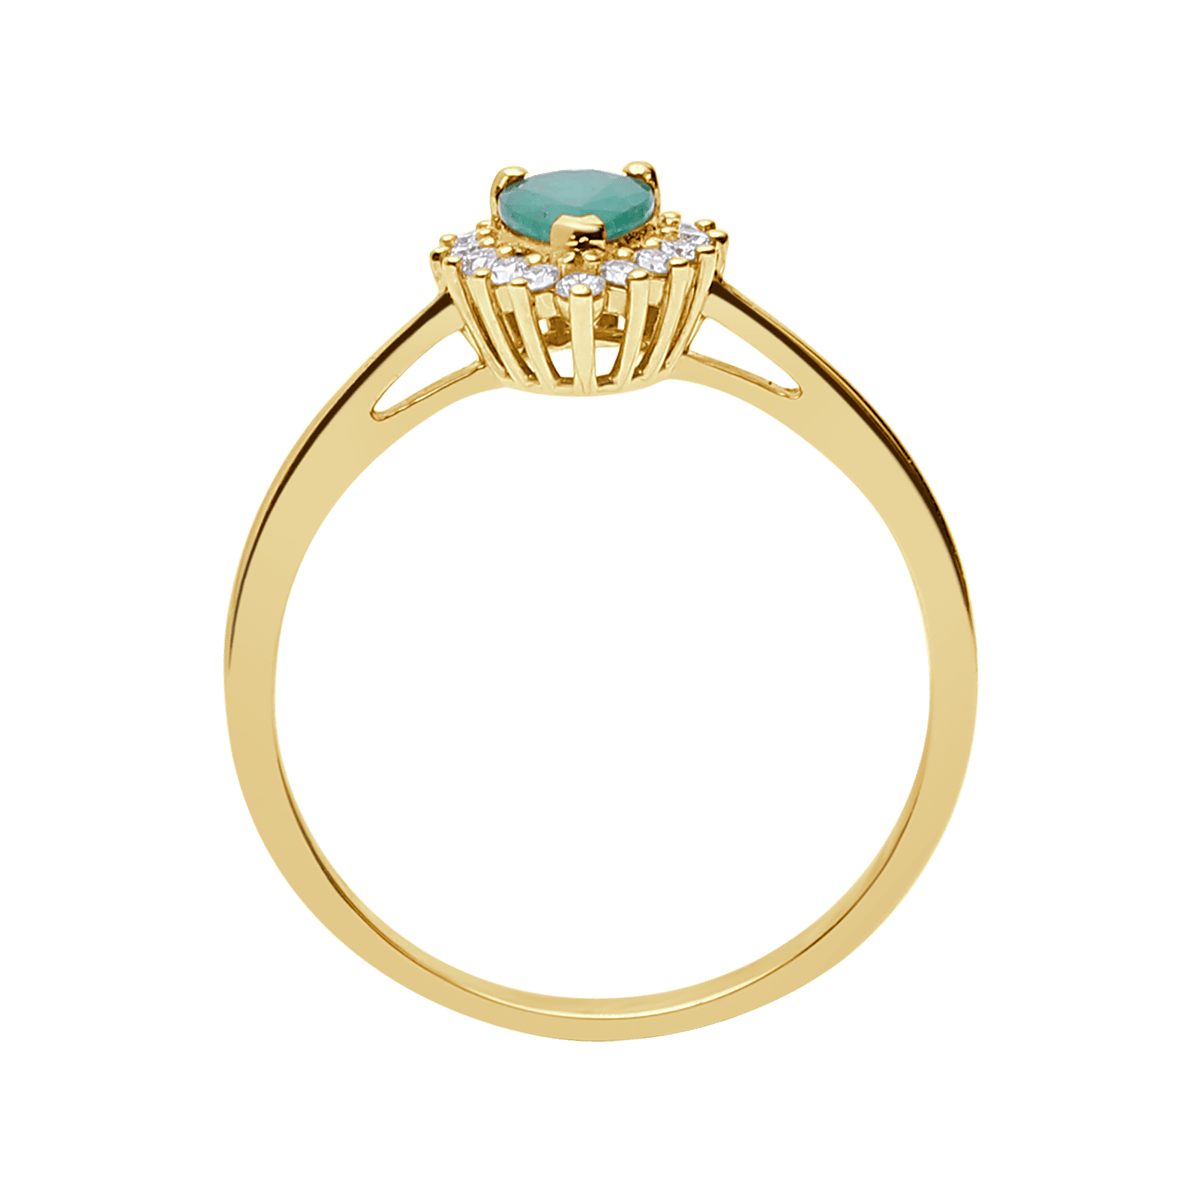 Pear Gemstone Diana Ring From Precious Collection